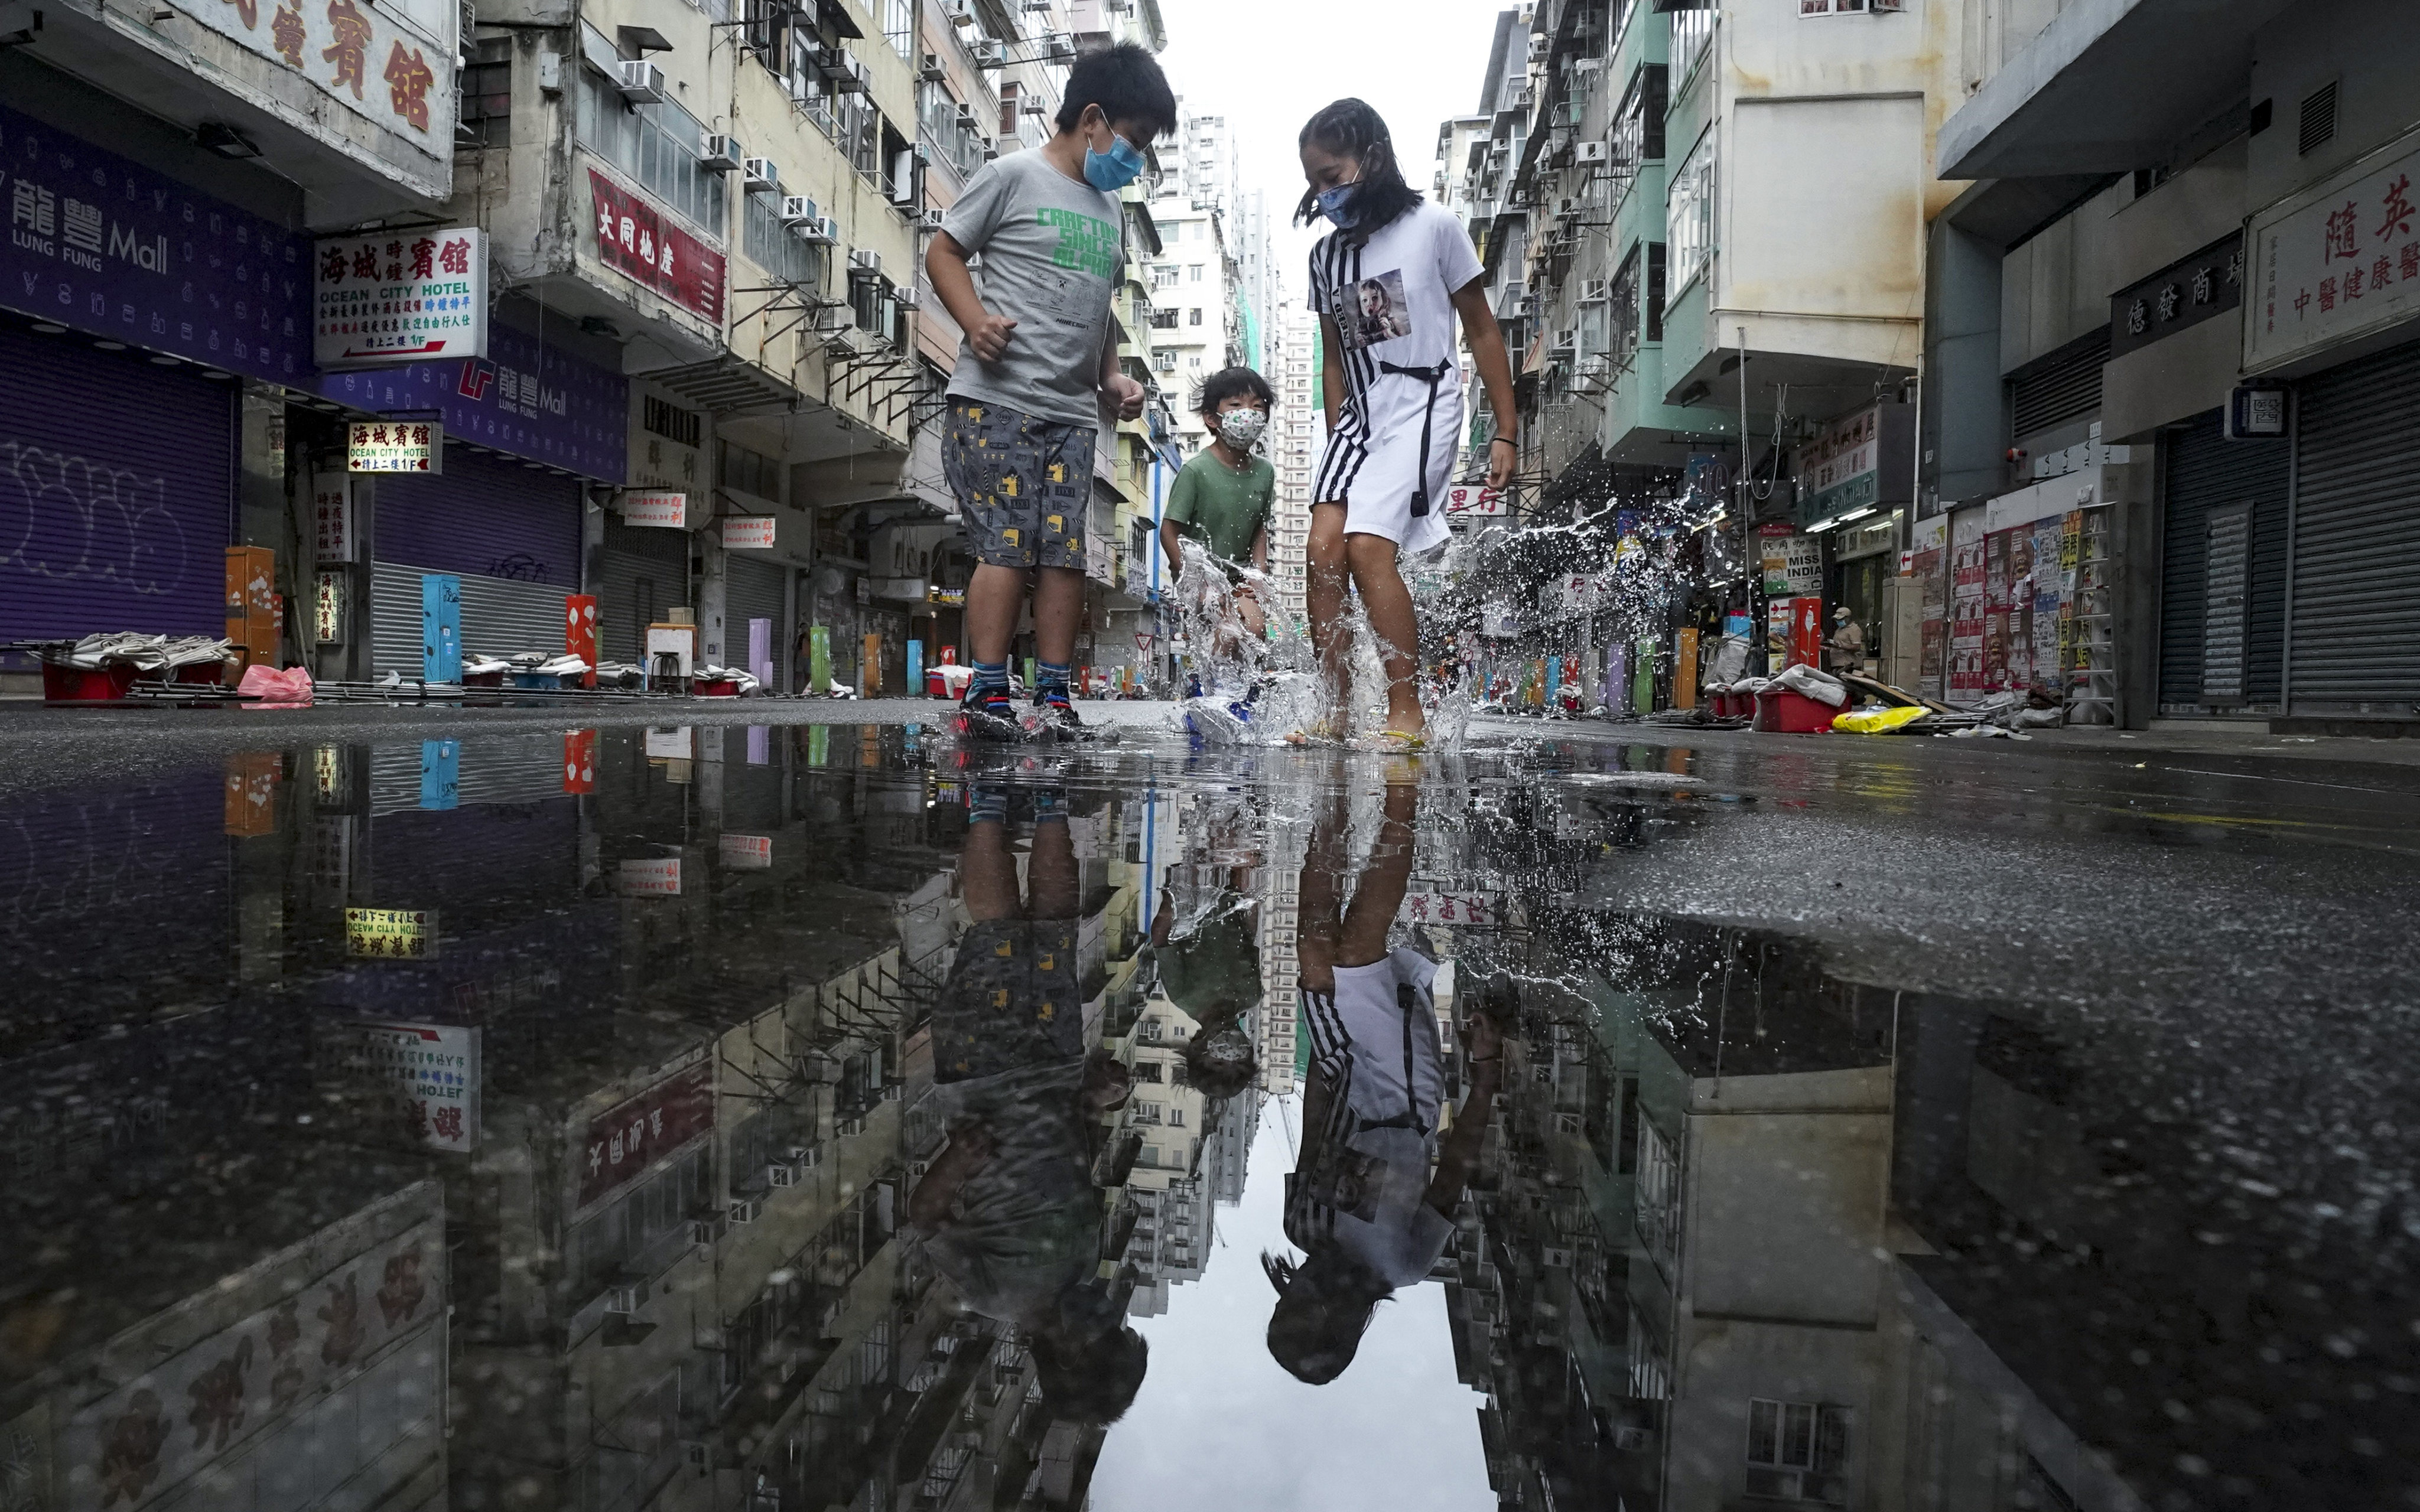 Children splash in puddles on Tung Choi Street on October 13. In rich and peaceful Hong Kong, every child should be happily going to school, getting a good education and playing with their peers. Photo: Felix Wong